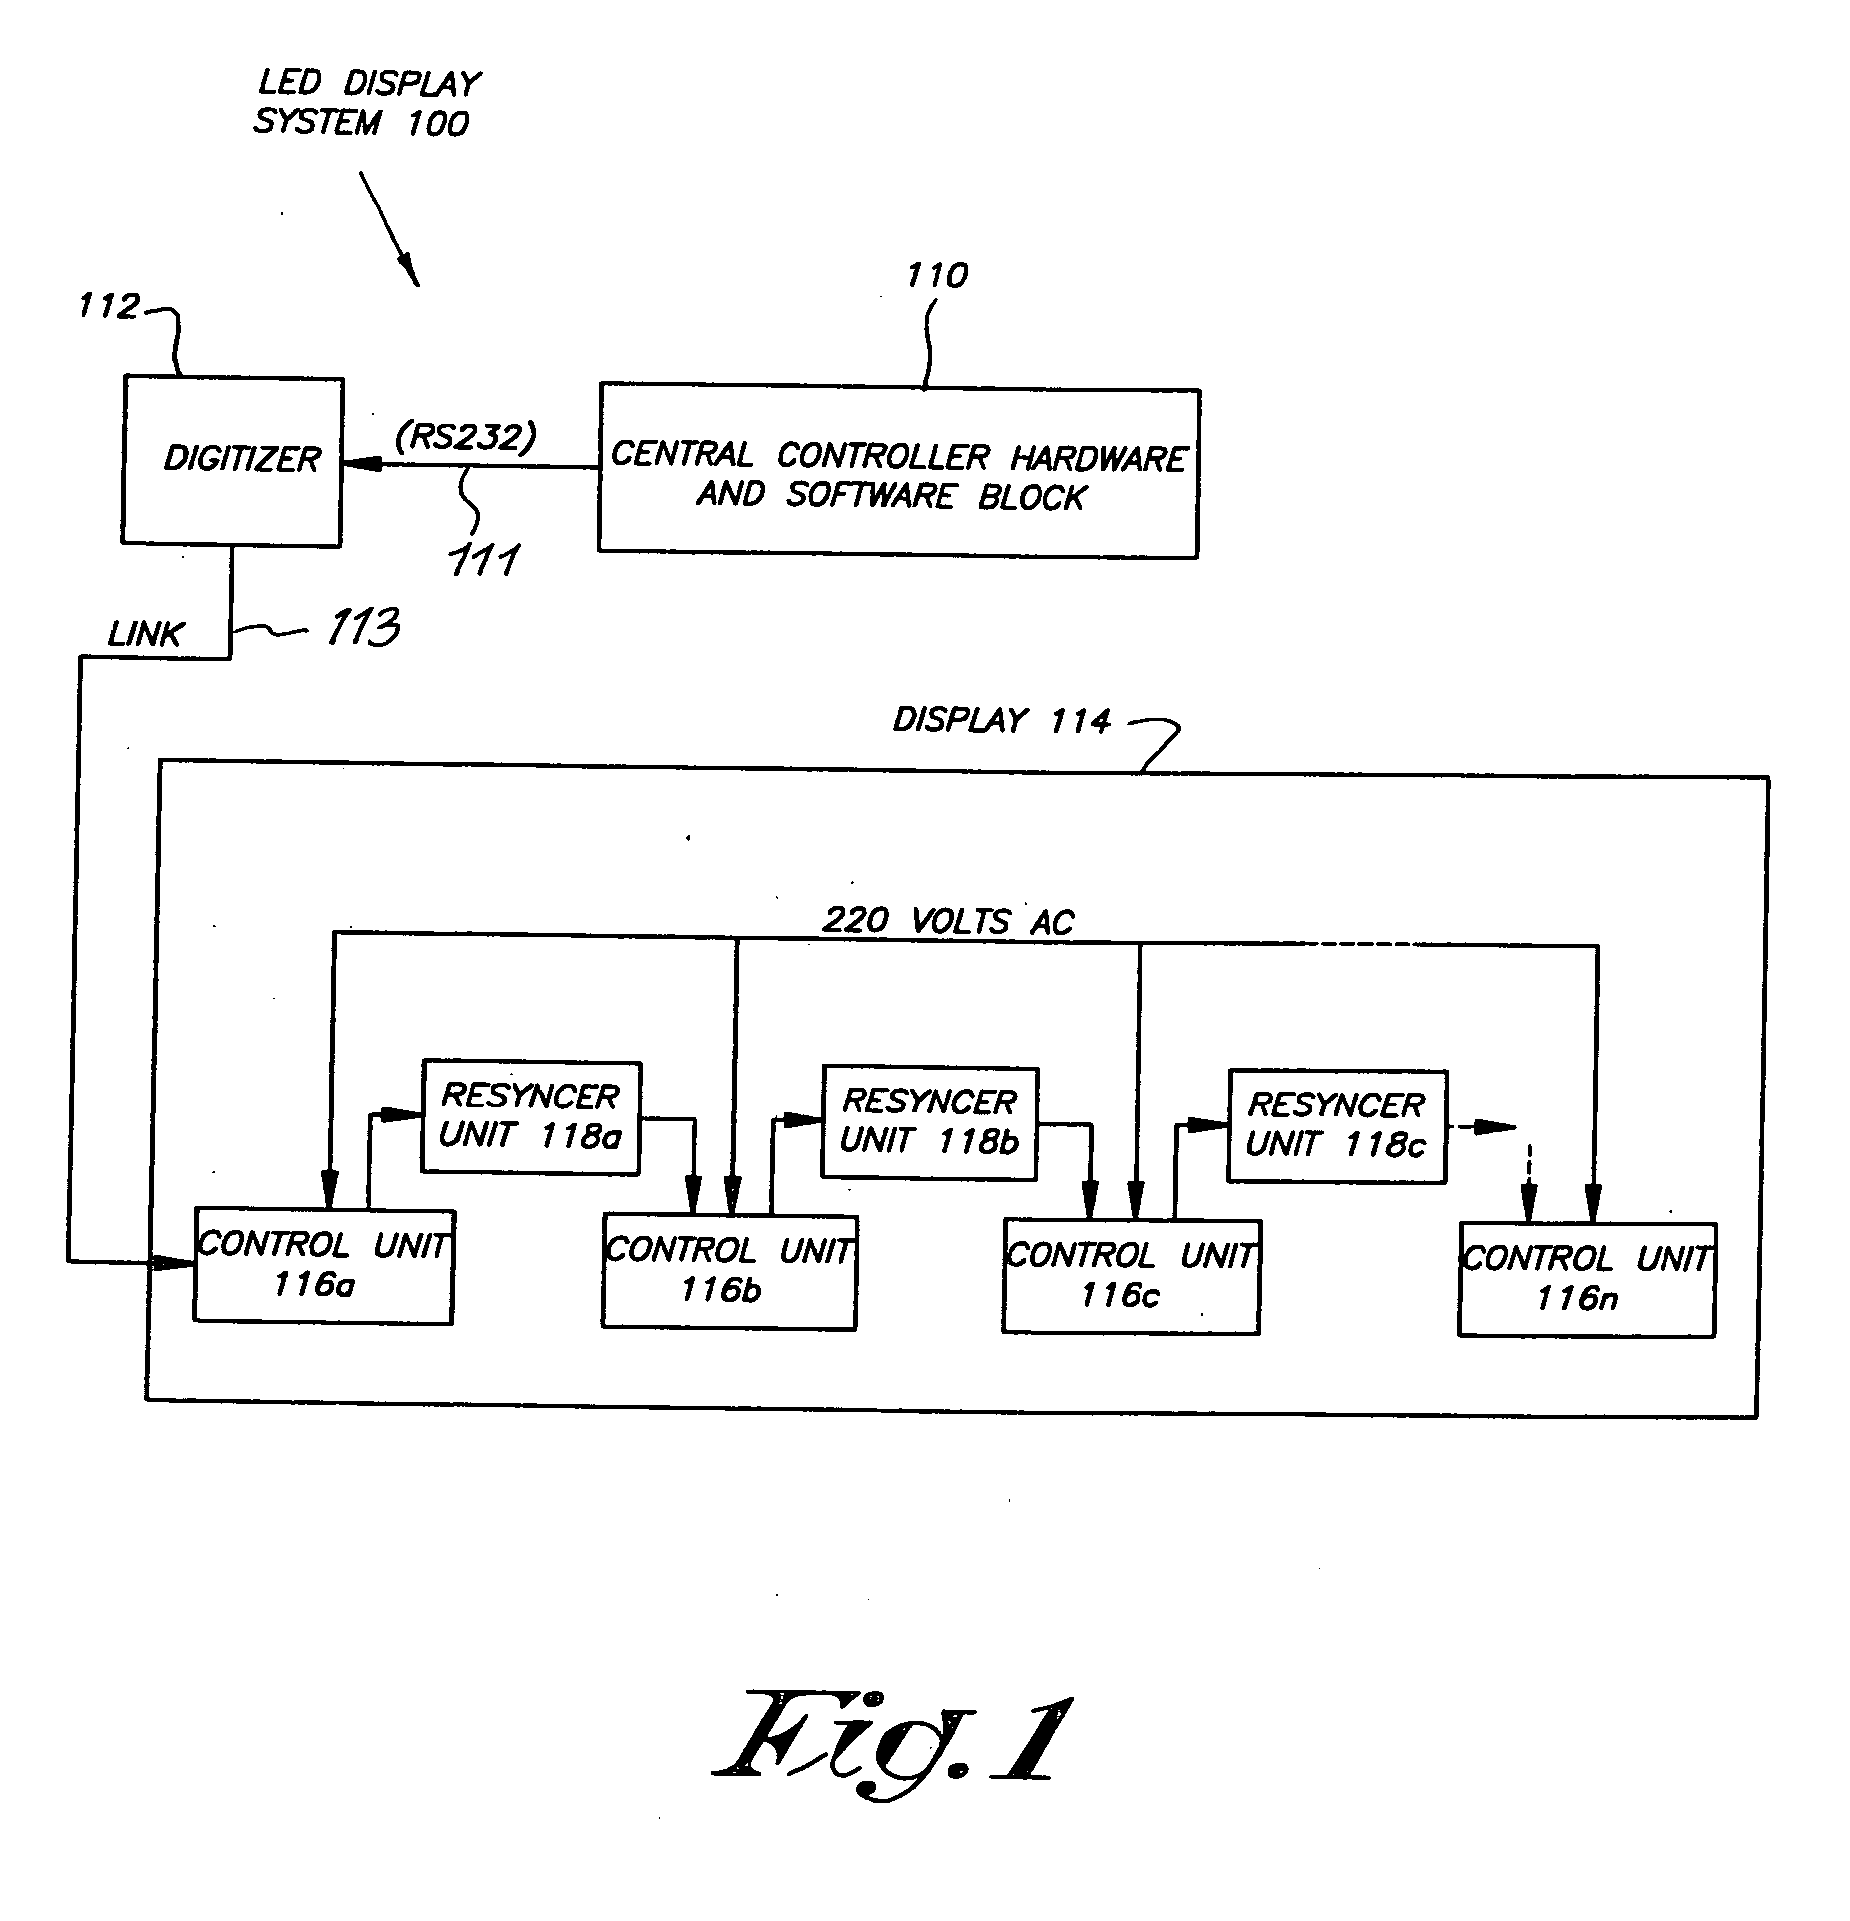 Configurable large-area display system and control unit used therein, and method of operating the display